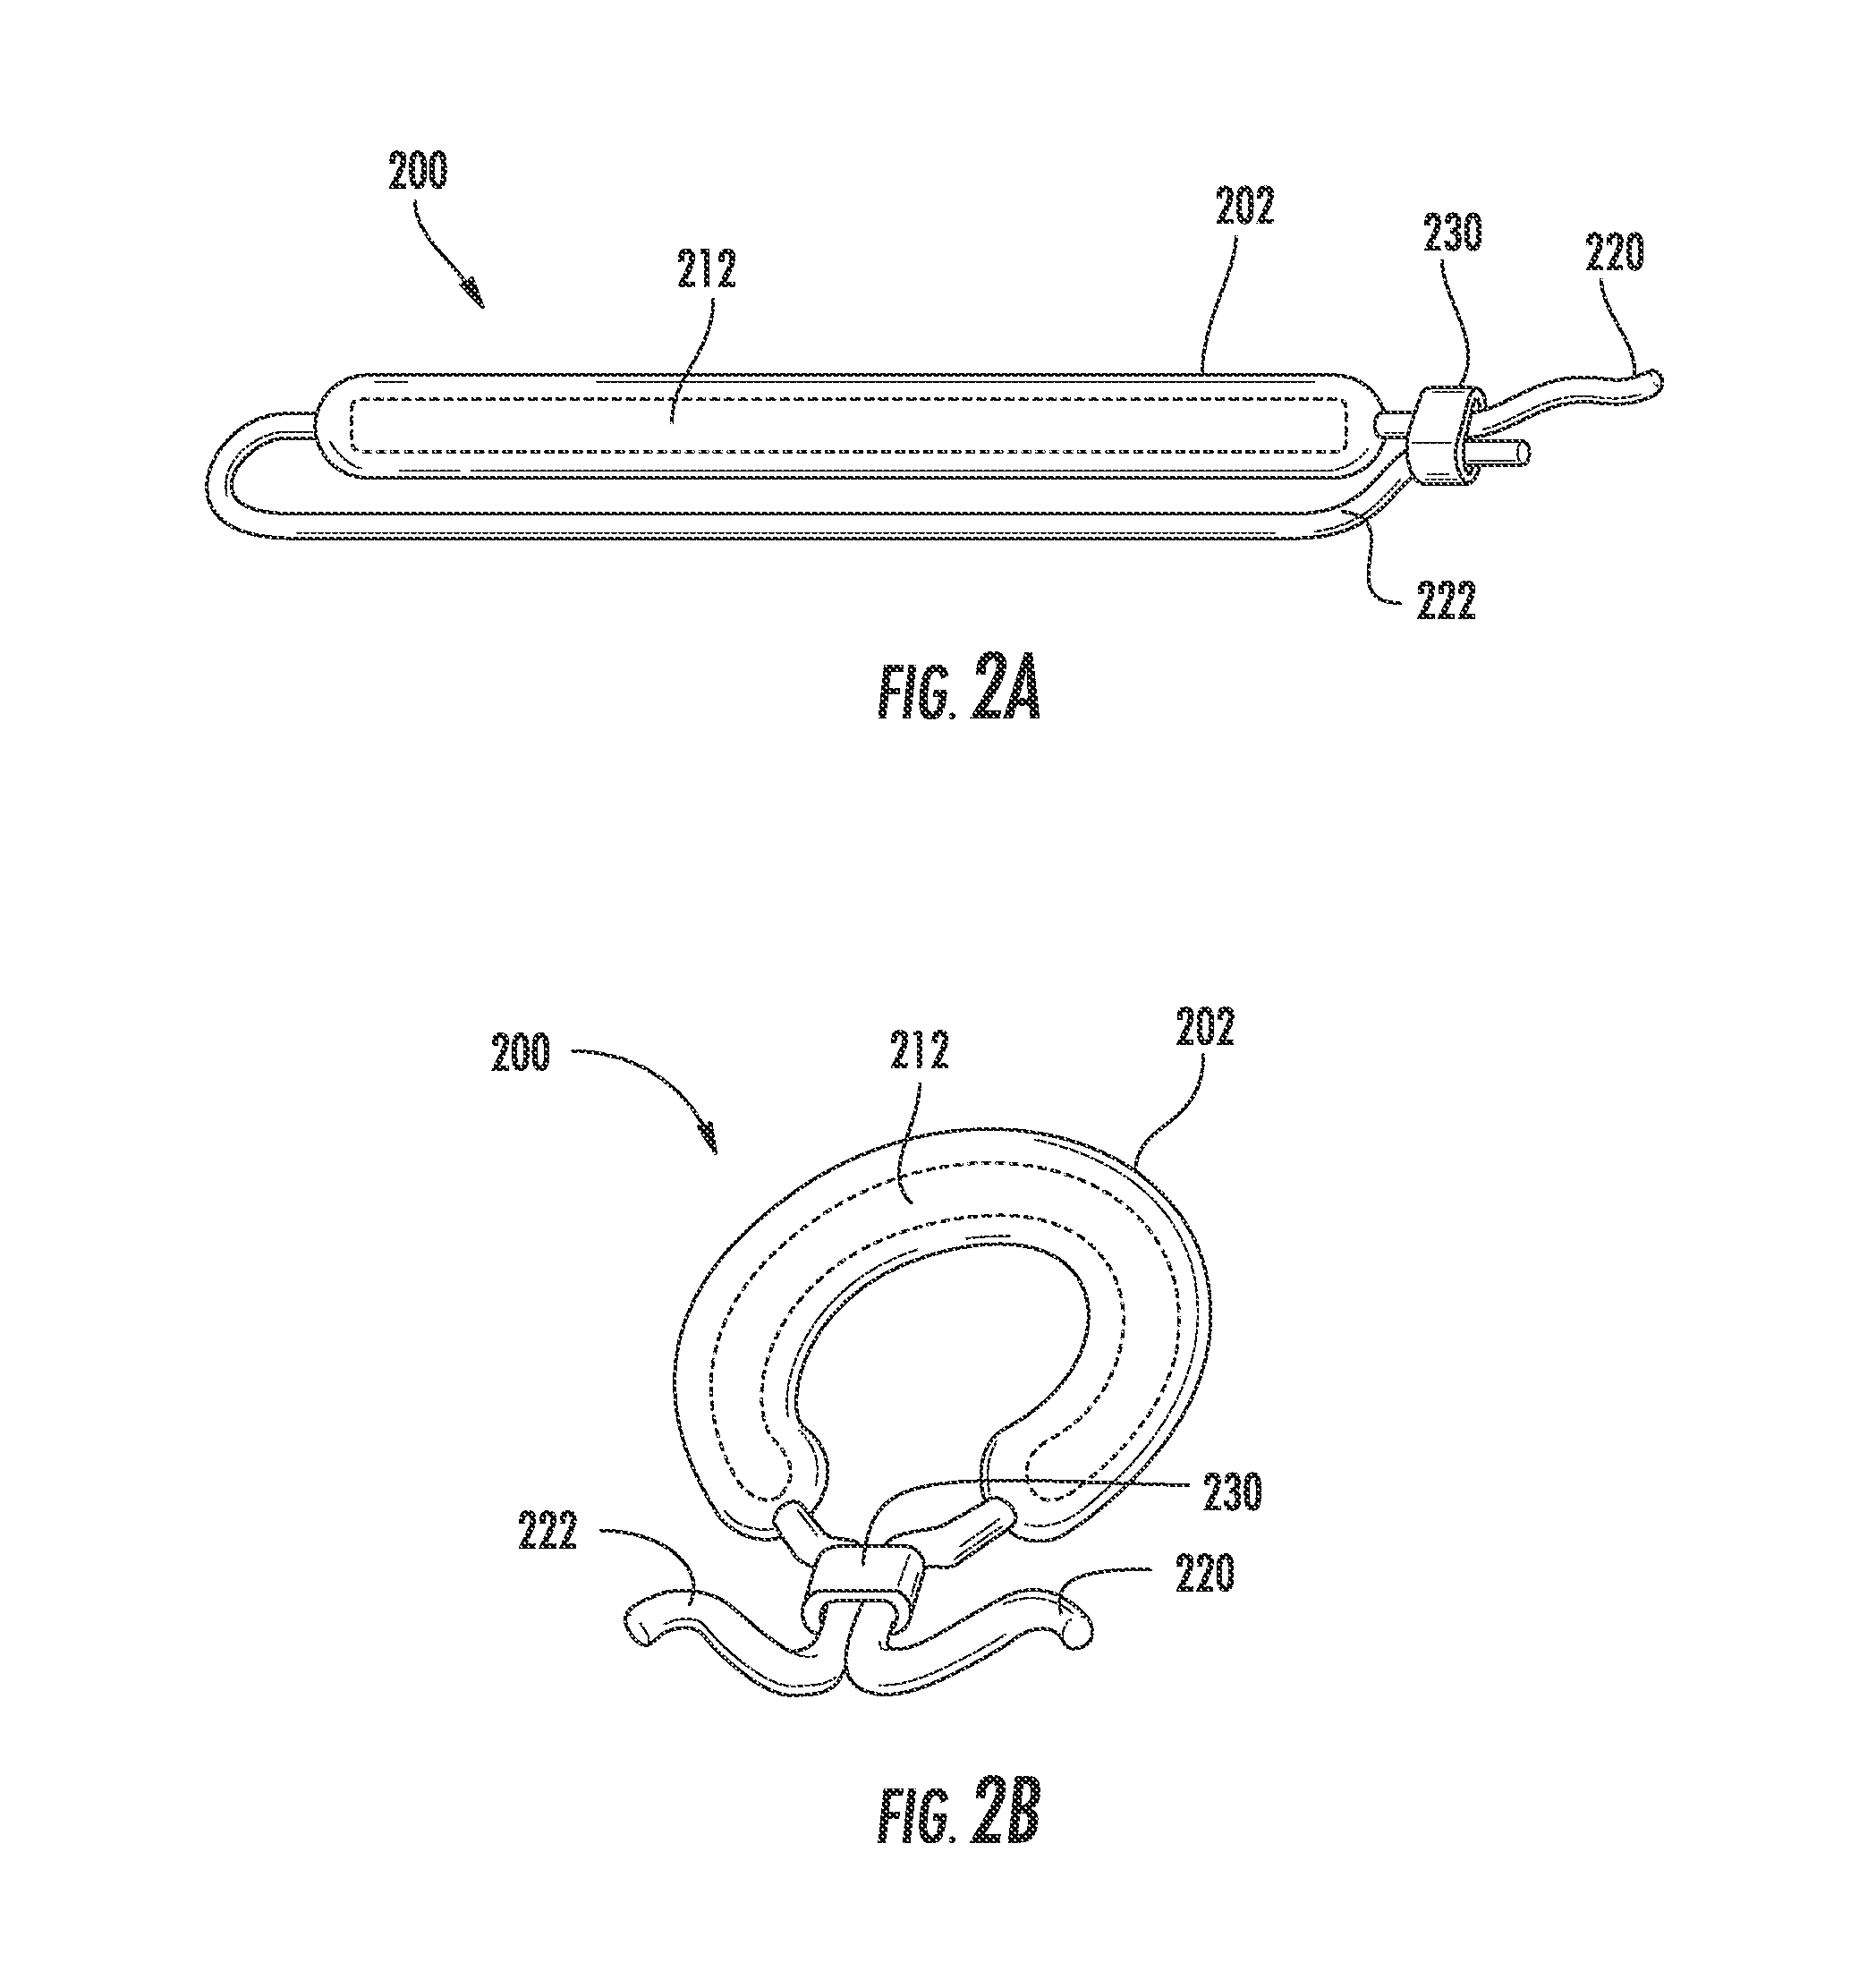 Drug delivery systems and methods for treatment of bladder cancer with gemcitabine